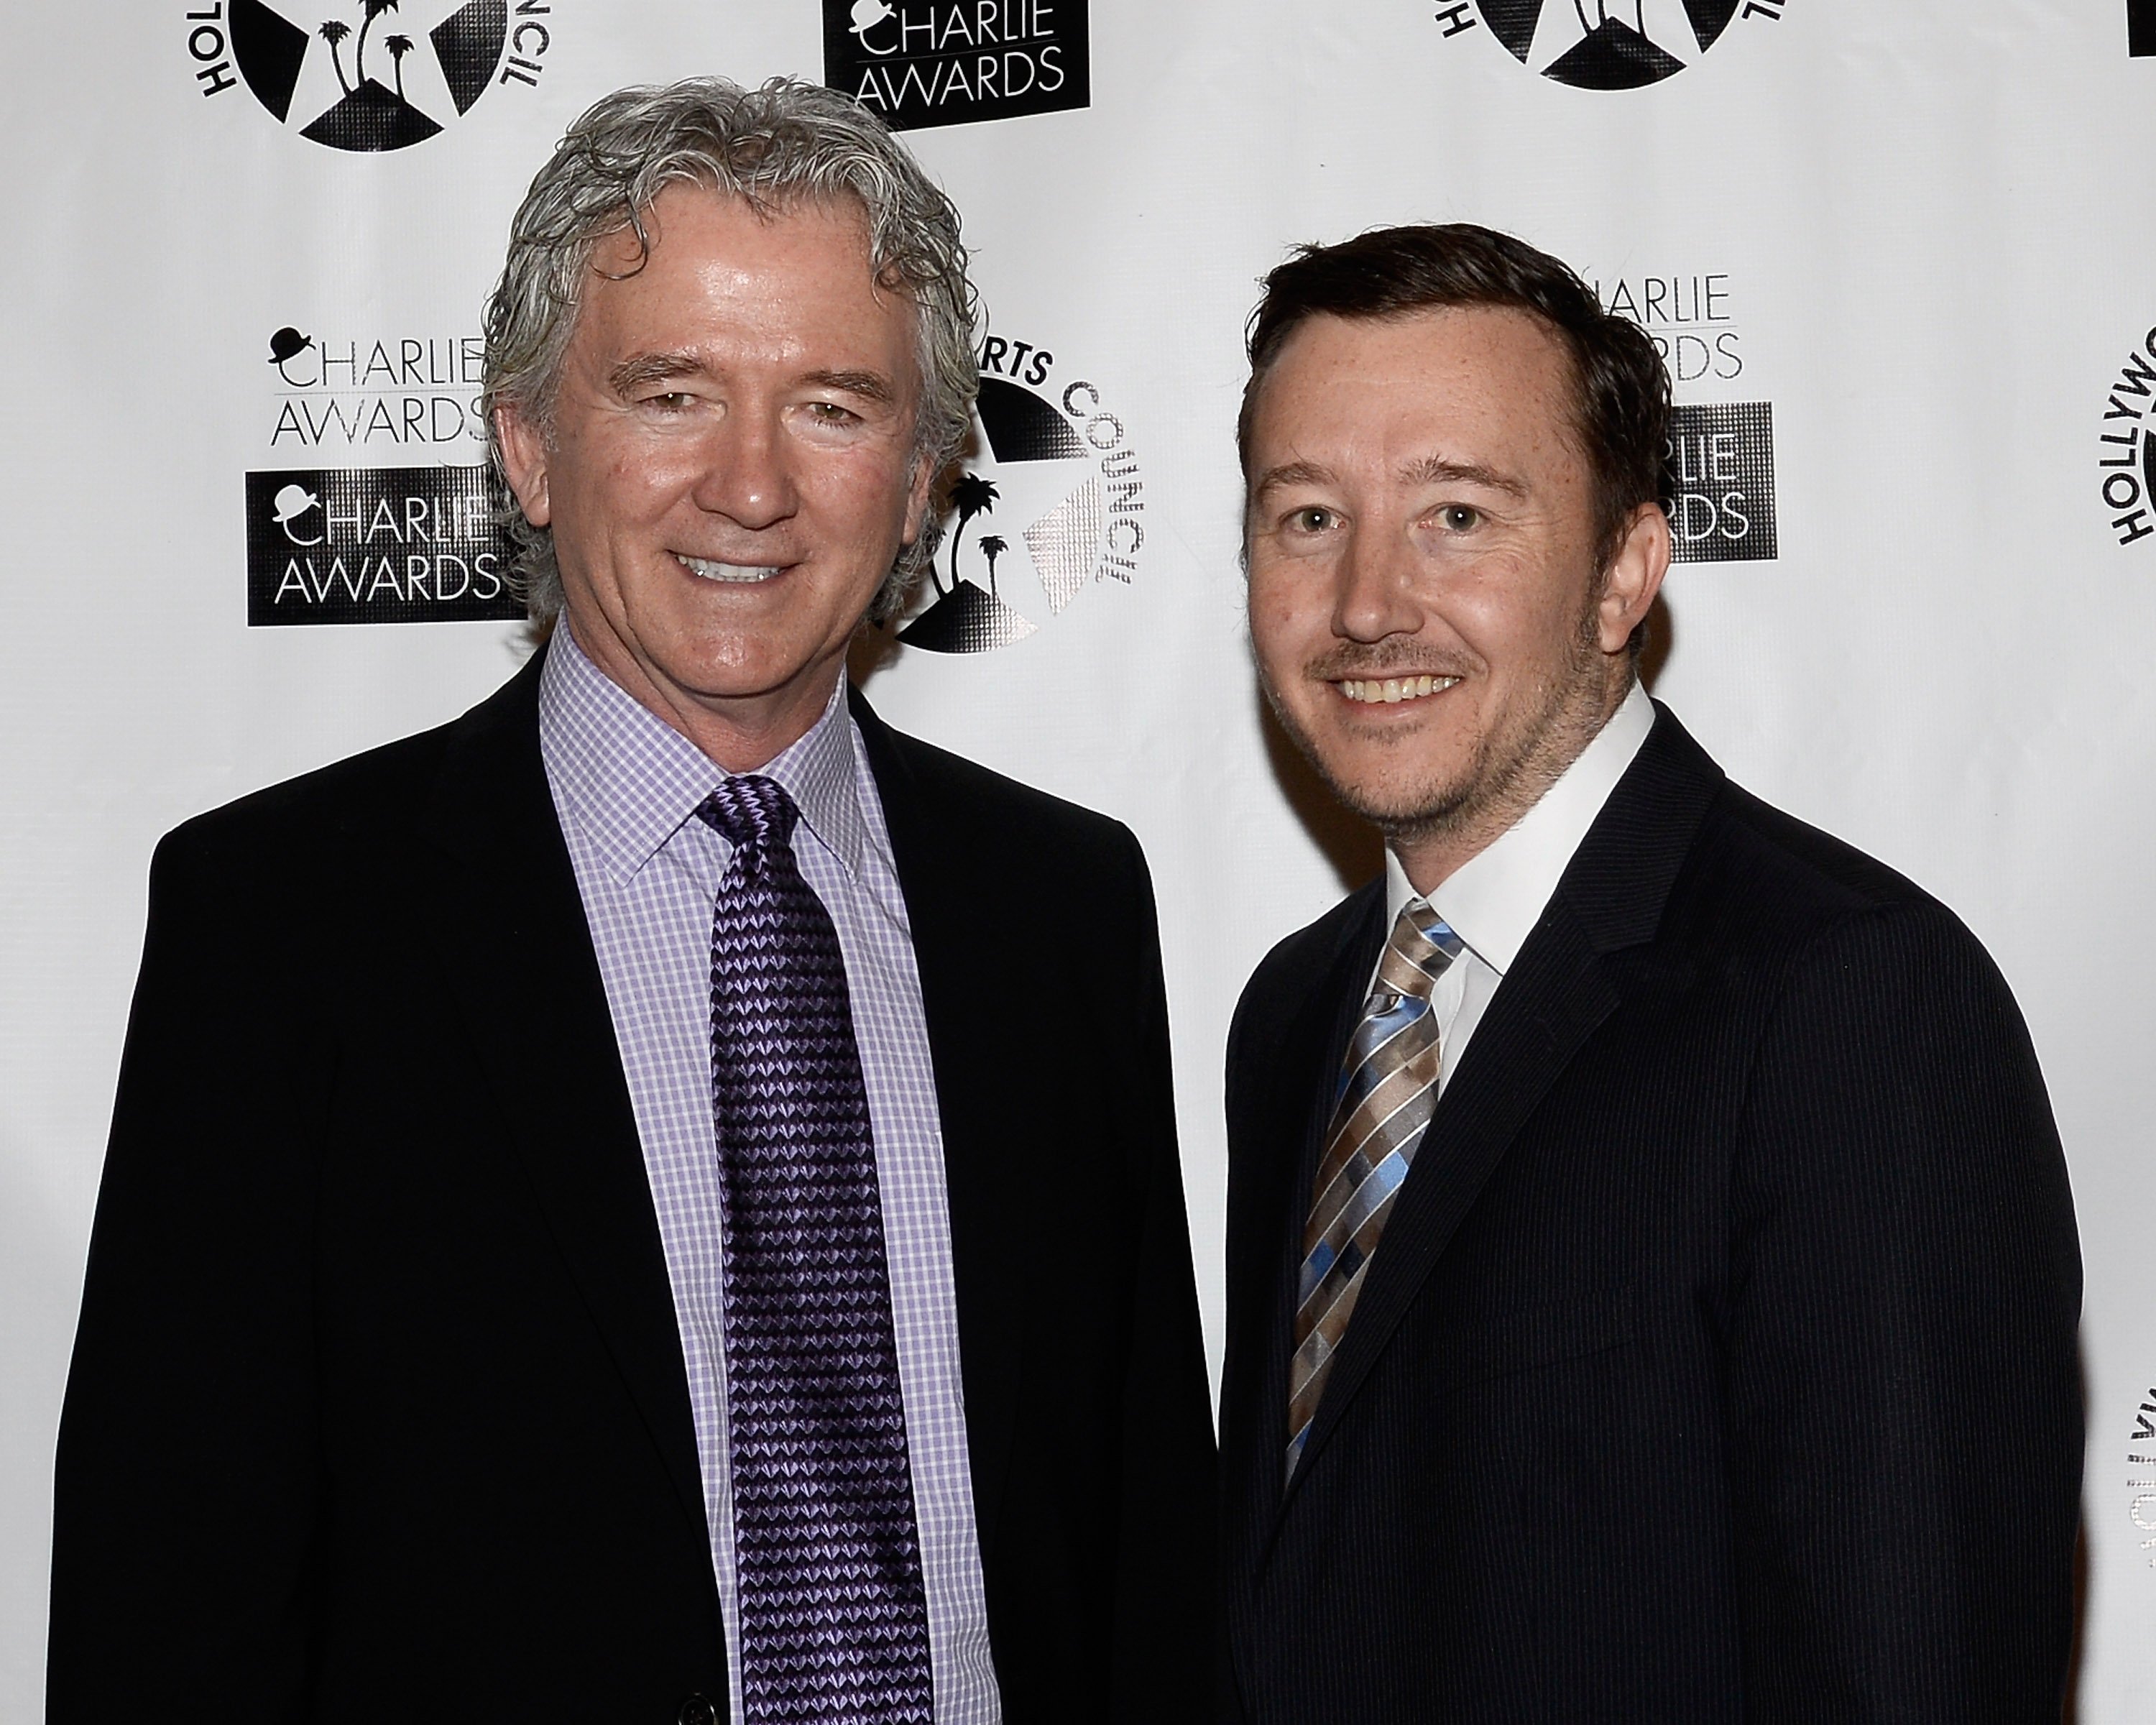 Patrick Duffy and Padraic Duffy pose during their attendance at the 29th Annual Charlie Awards Luncheon by The Hollywood Arts Council at Hollywood Roosevelt Hotel on May 1, 2015, in Hollywood, California. | Source: Getty Images